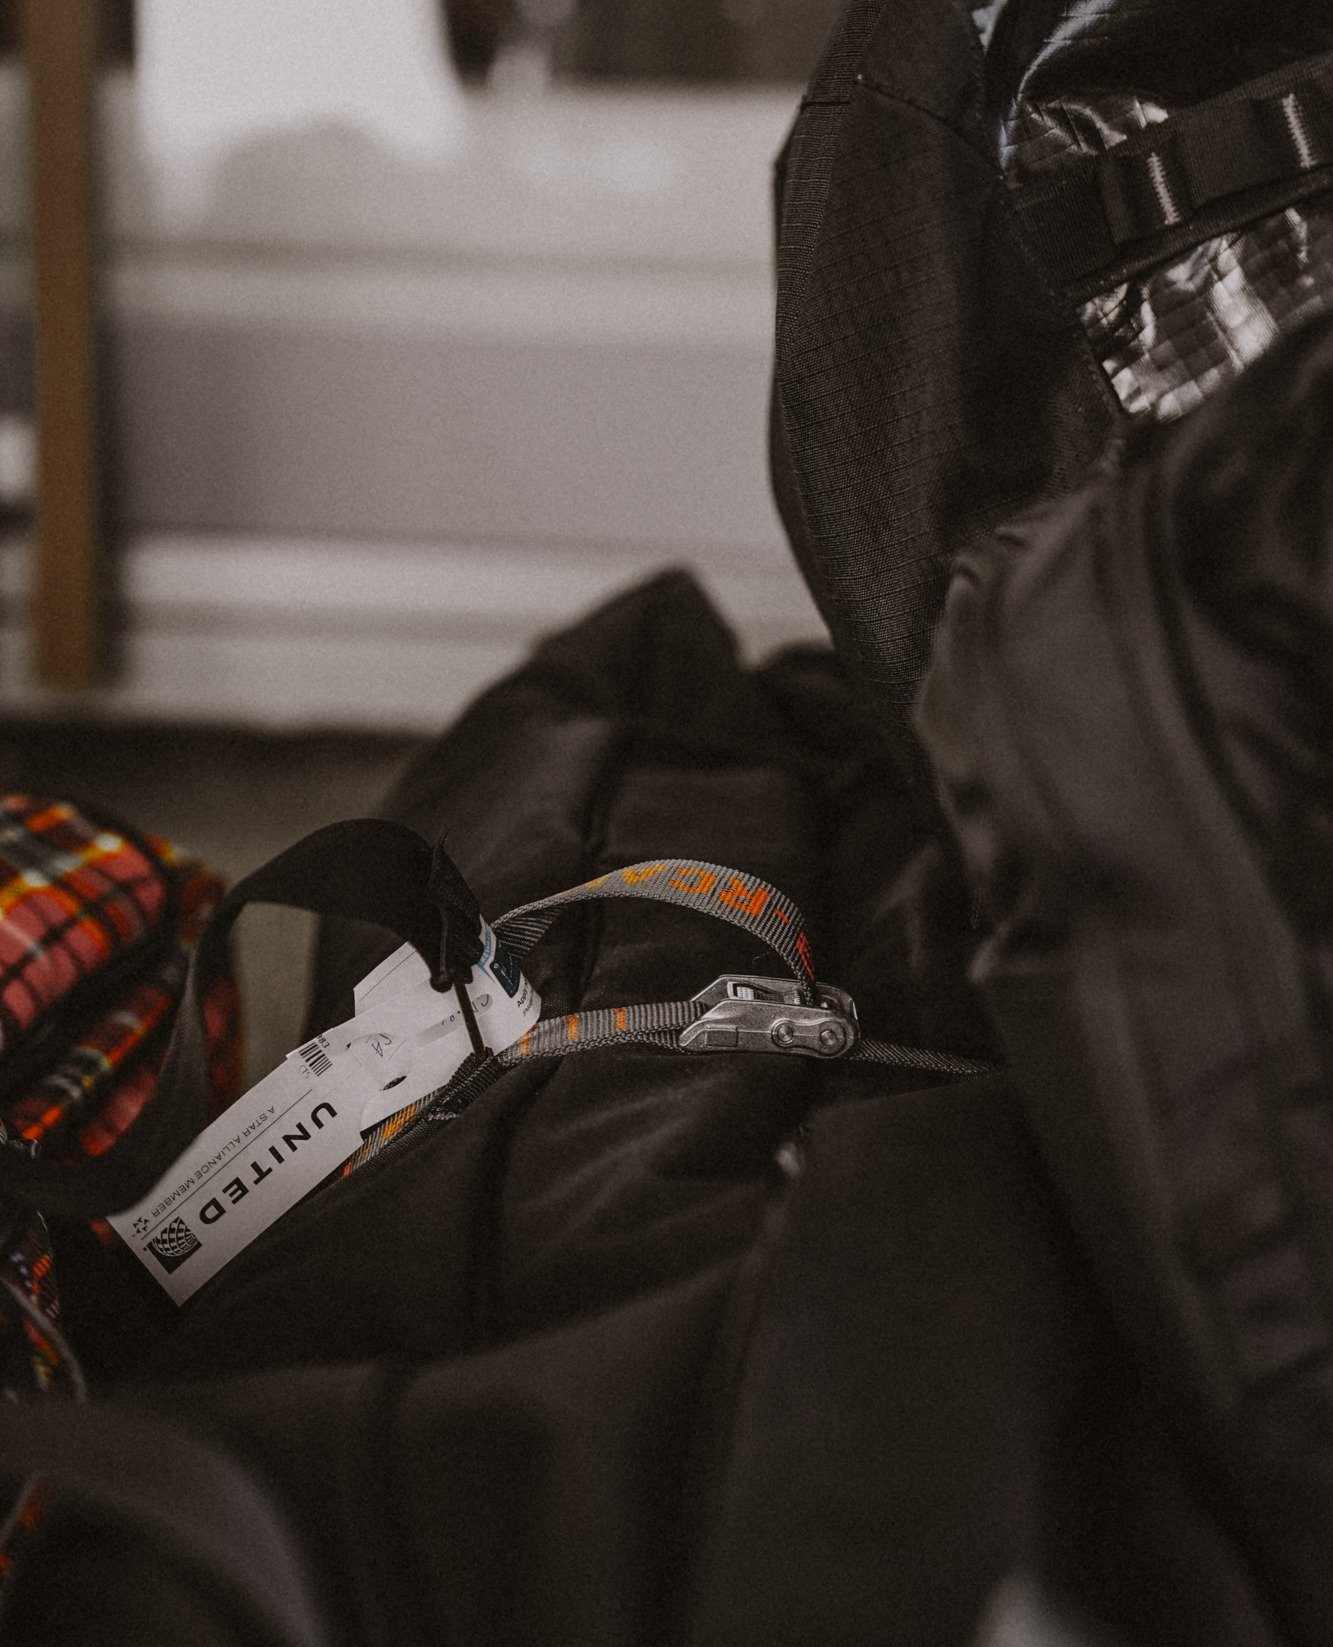 Keeping travel bags secure since '03. The Expedition is designed for everywhere you go whether that off-road, on road, or in the air.⁠
⁠
⁠
⁠
⁠
⁠
⁠
&mdash;&mdash;&mdash;&mdash;&mdash;&mdash;&mdash;&mdash;⁠
#overland #offroad #4x4 #adventure #letsgopla